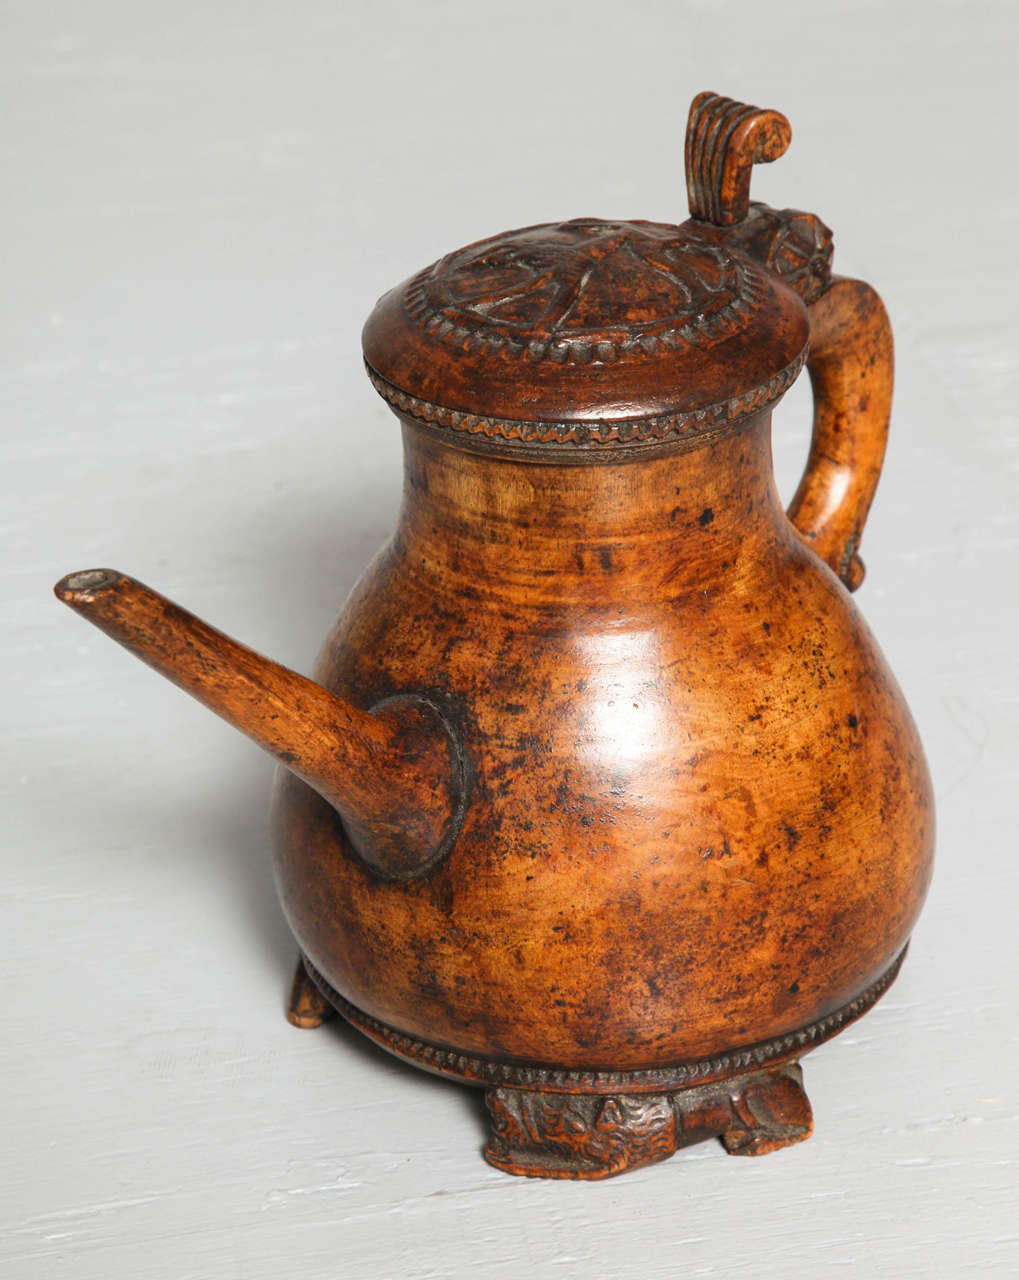 Most unusual late 18th century Norwegian Folk Art burl birch pitcher of a form more typically found as a peg tankard, the lid with relief carved lion, over a swelled body with elongated spout, standing on three lion carved feet, the whole with rich